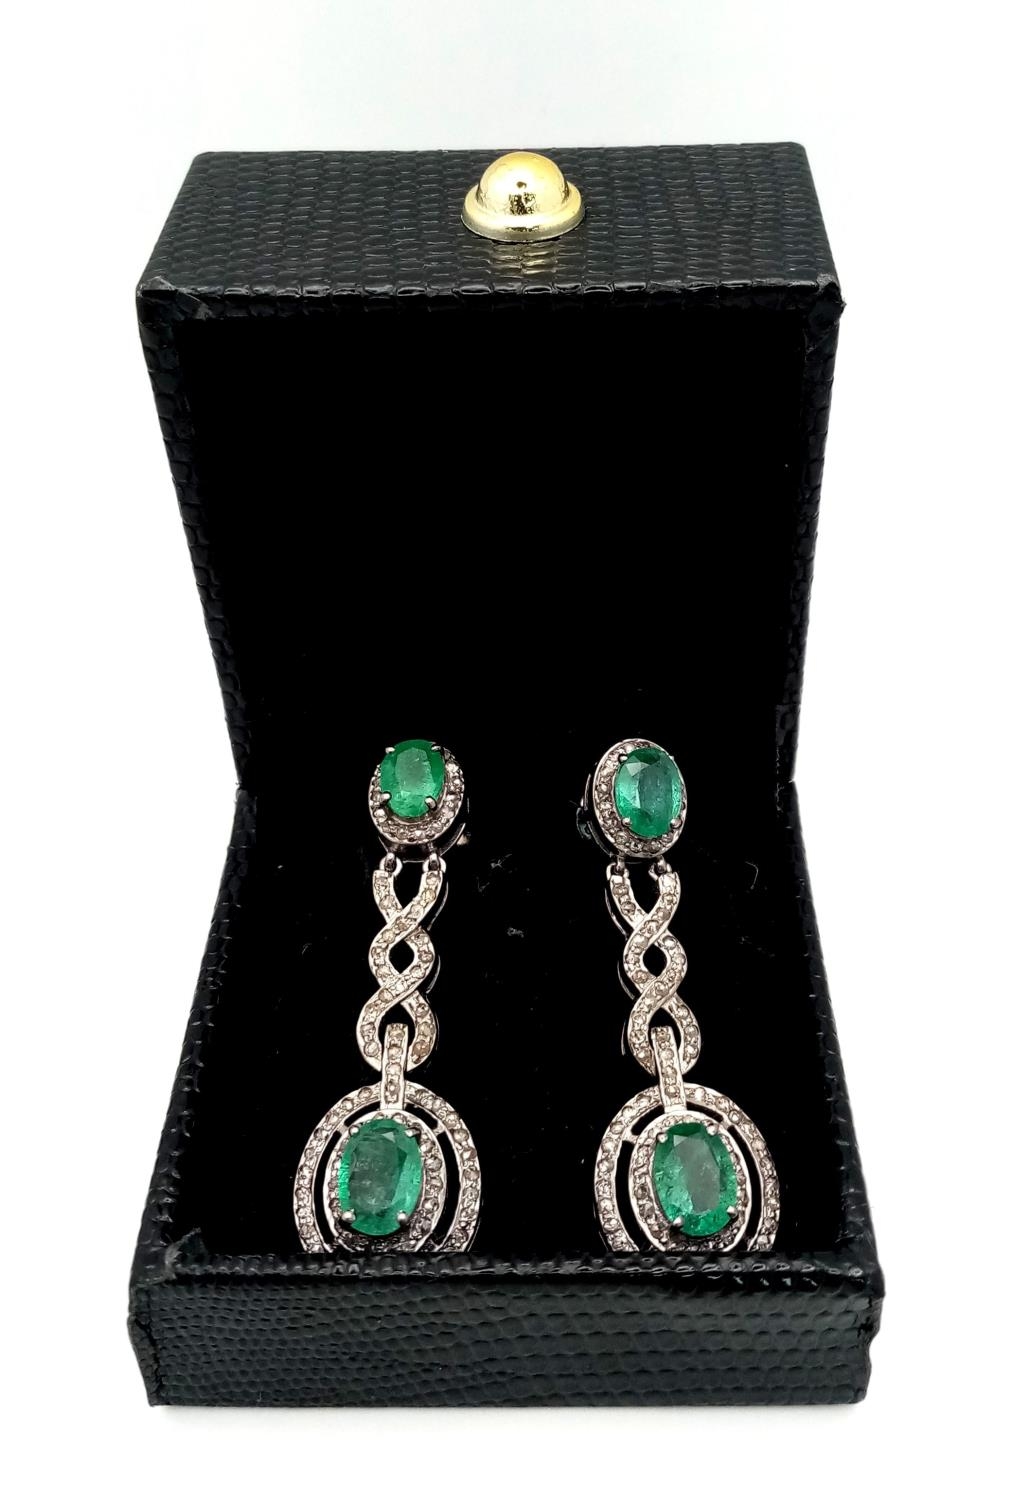 A Pair of Emerald Gemstone Drop Earrings with 3ctw of Emerald and Diamonds - 1.5ctw. Set in 925 - Image 2 of 6